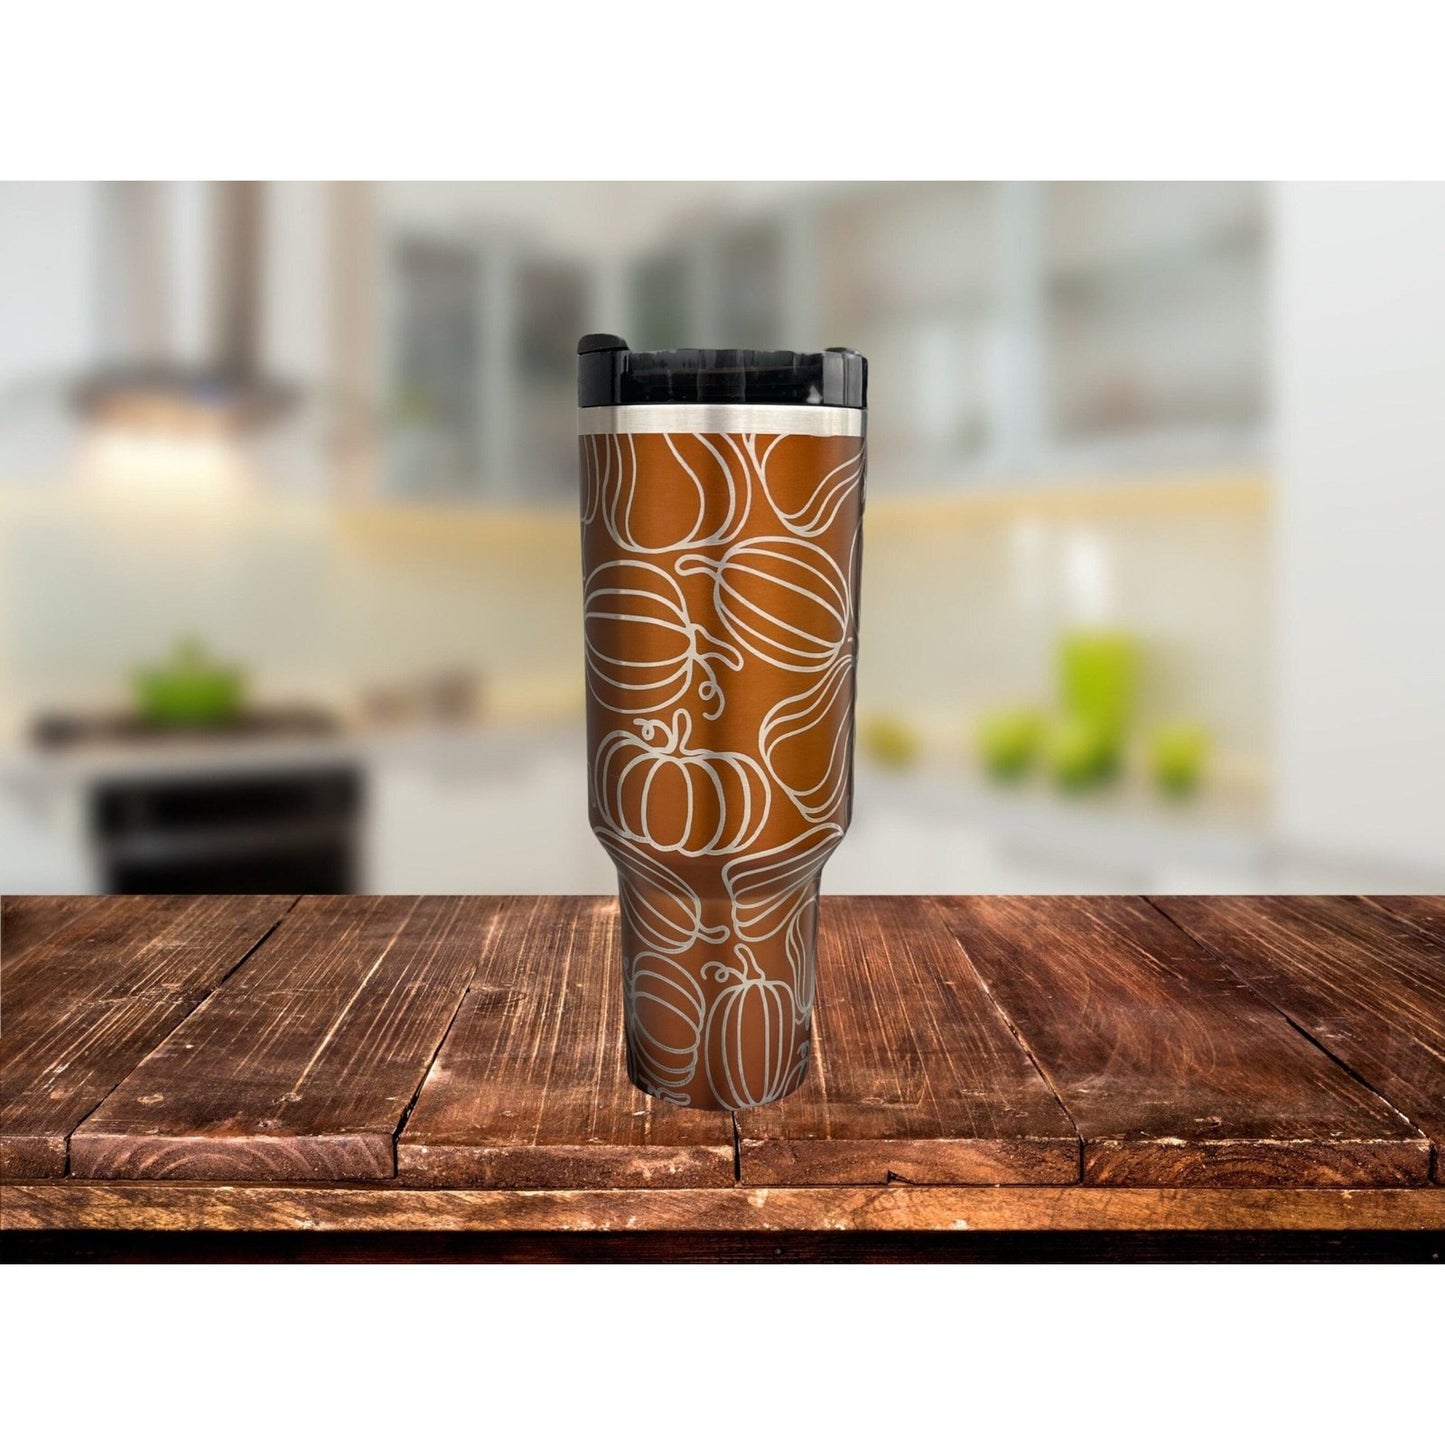 Pumpkin Seamless Laser Engraved 40 oz Insulated Tumbler with Handle Lid and Straw, Double Wall Insulated Cup